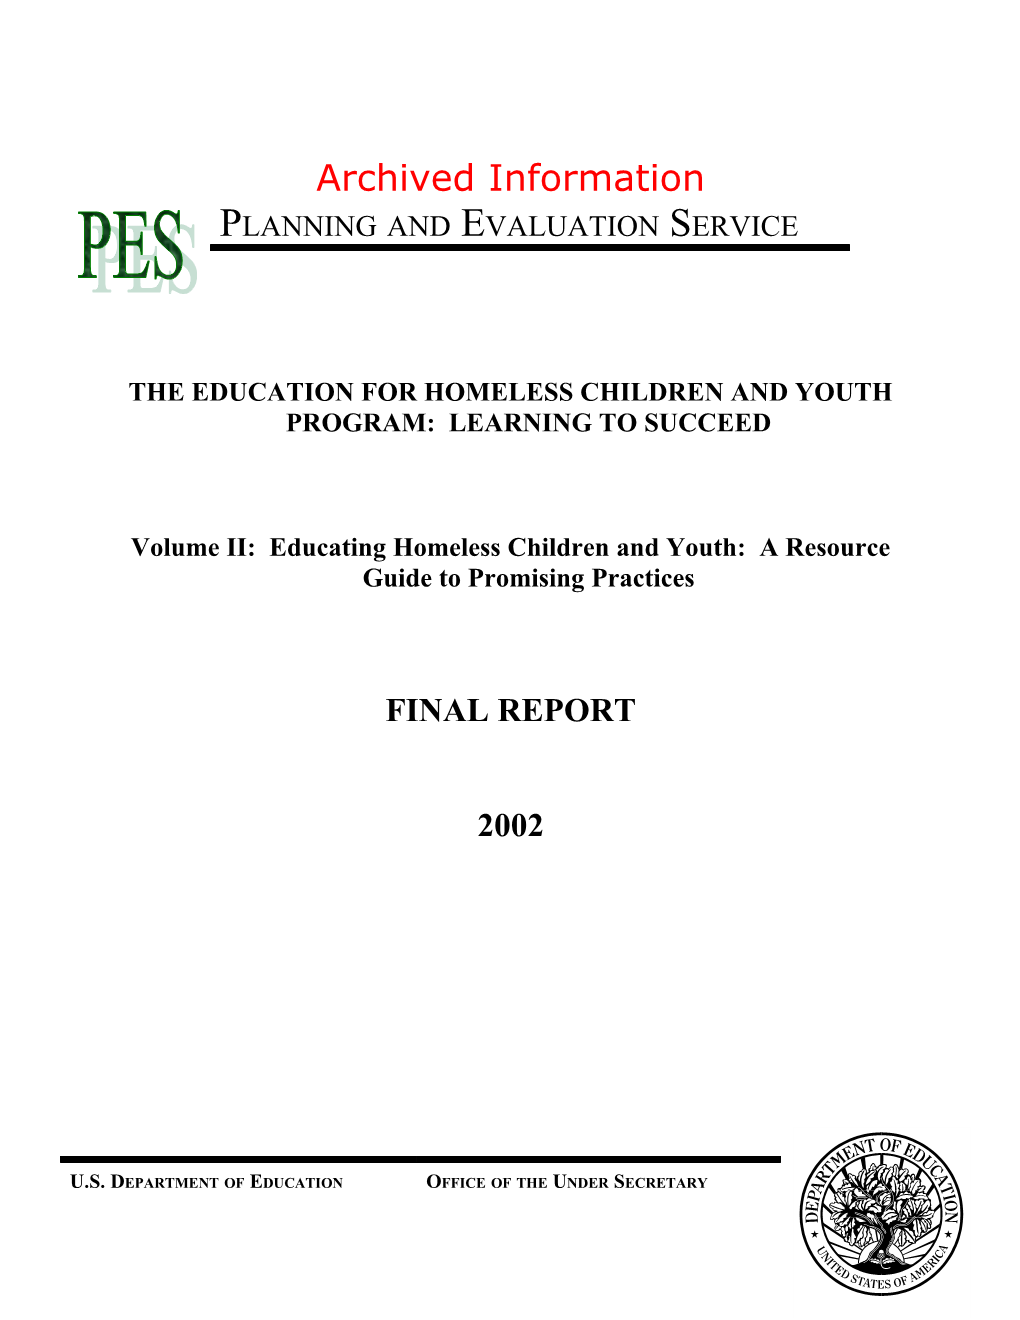 Archived: the Educational for Homeless Children and Youth Program: Learning to Succeed Volume 2